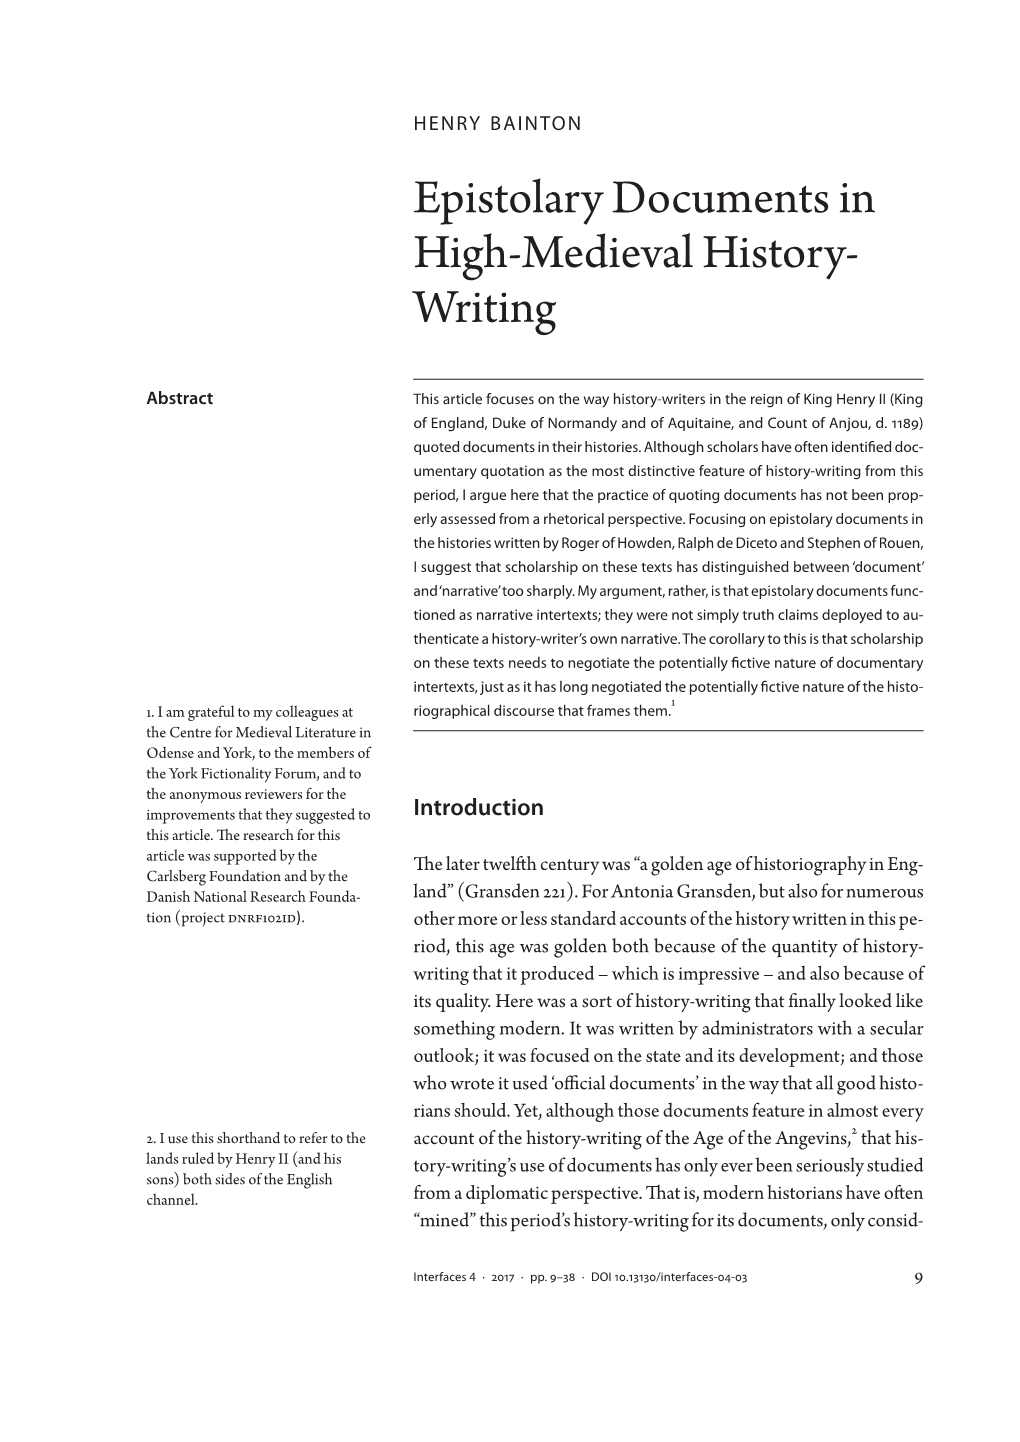 Epistolary Documents in High-Medieval History-Writing